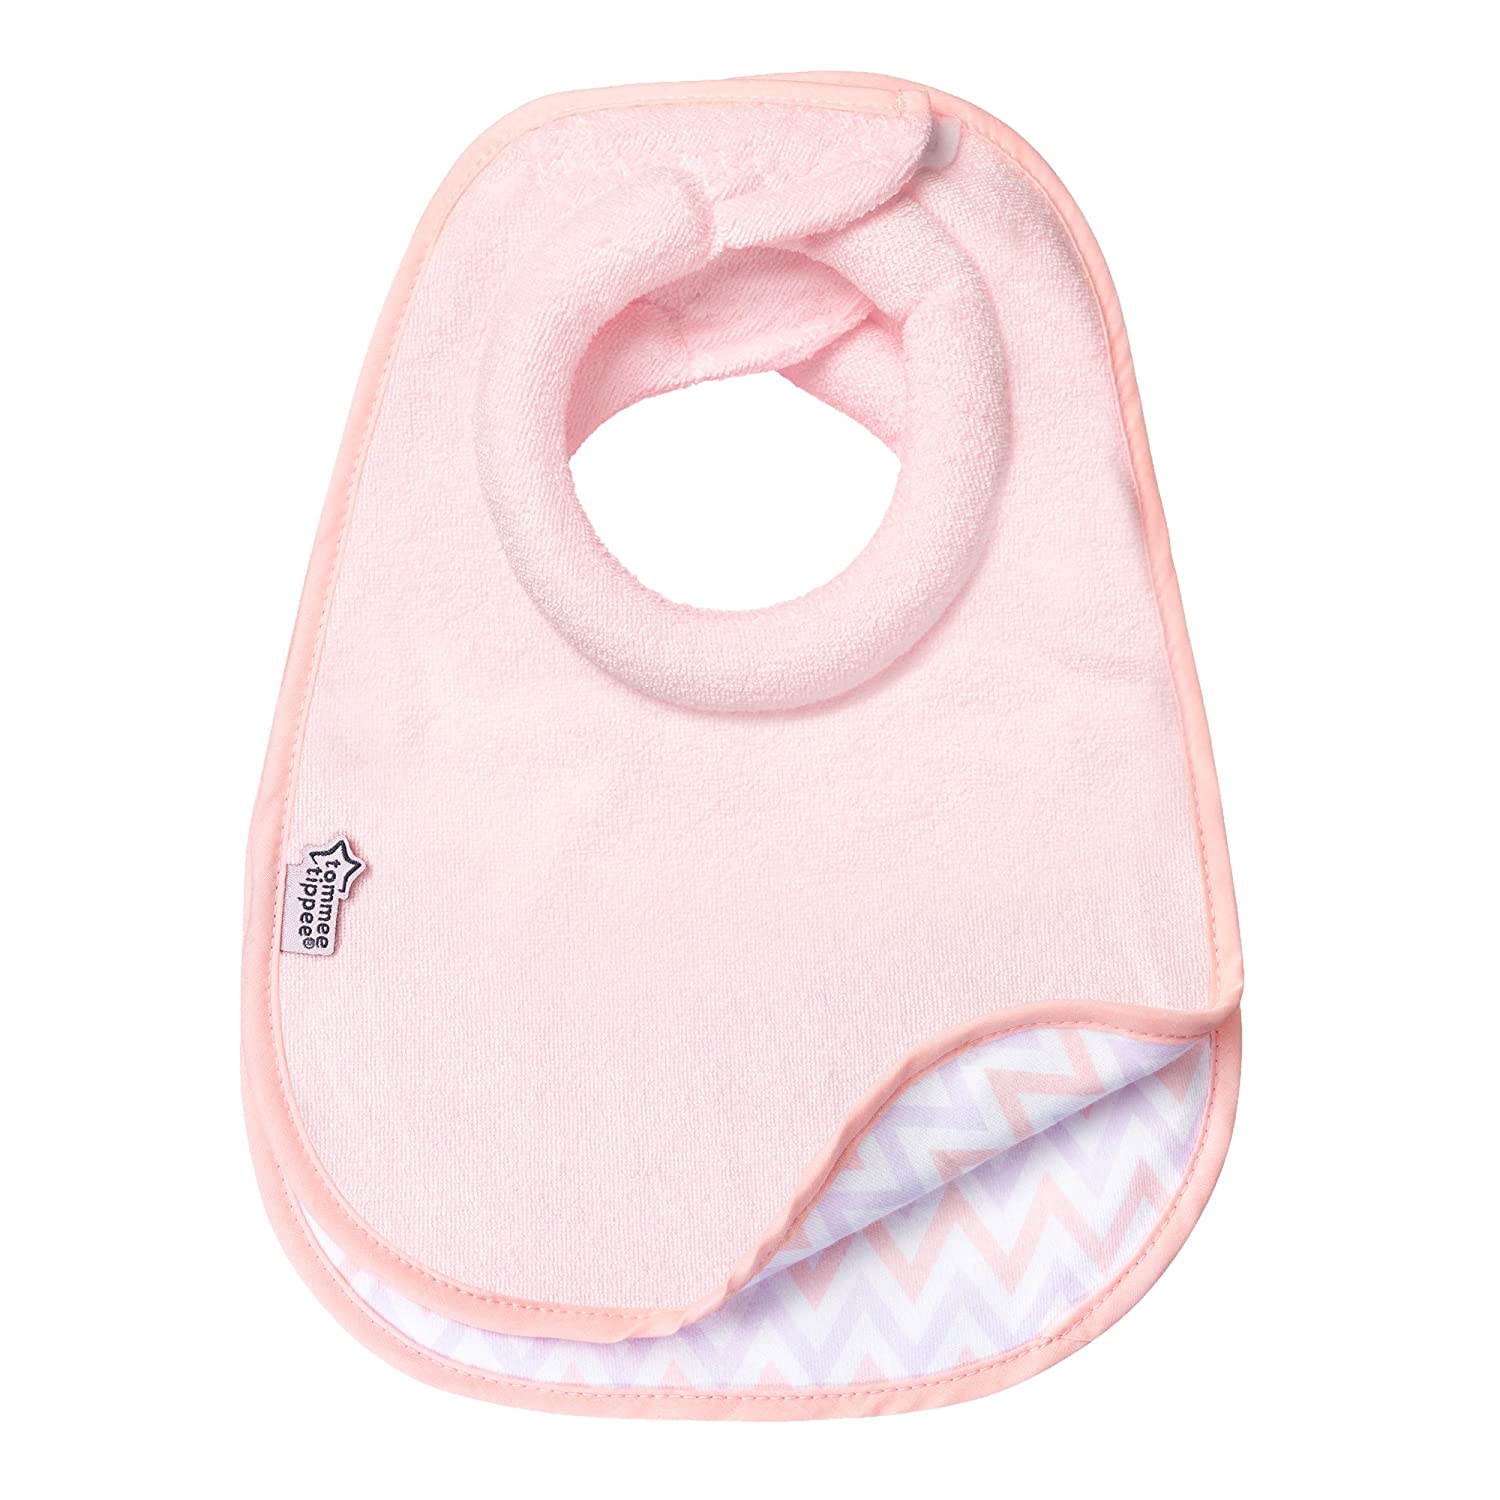 Tommee Tippee Closer To Nature Comfi-Neck Reversible Soft Baby Bib